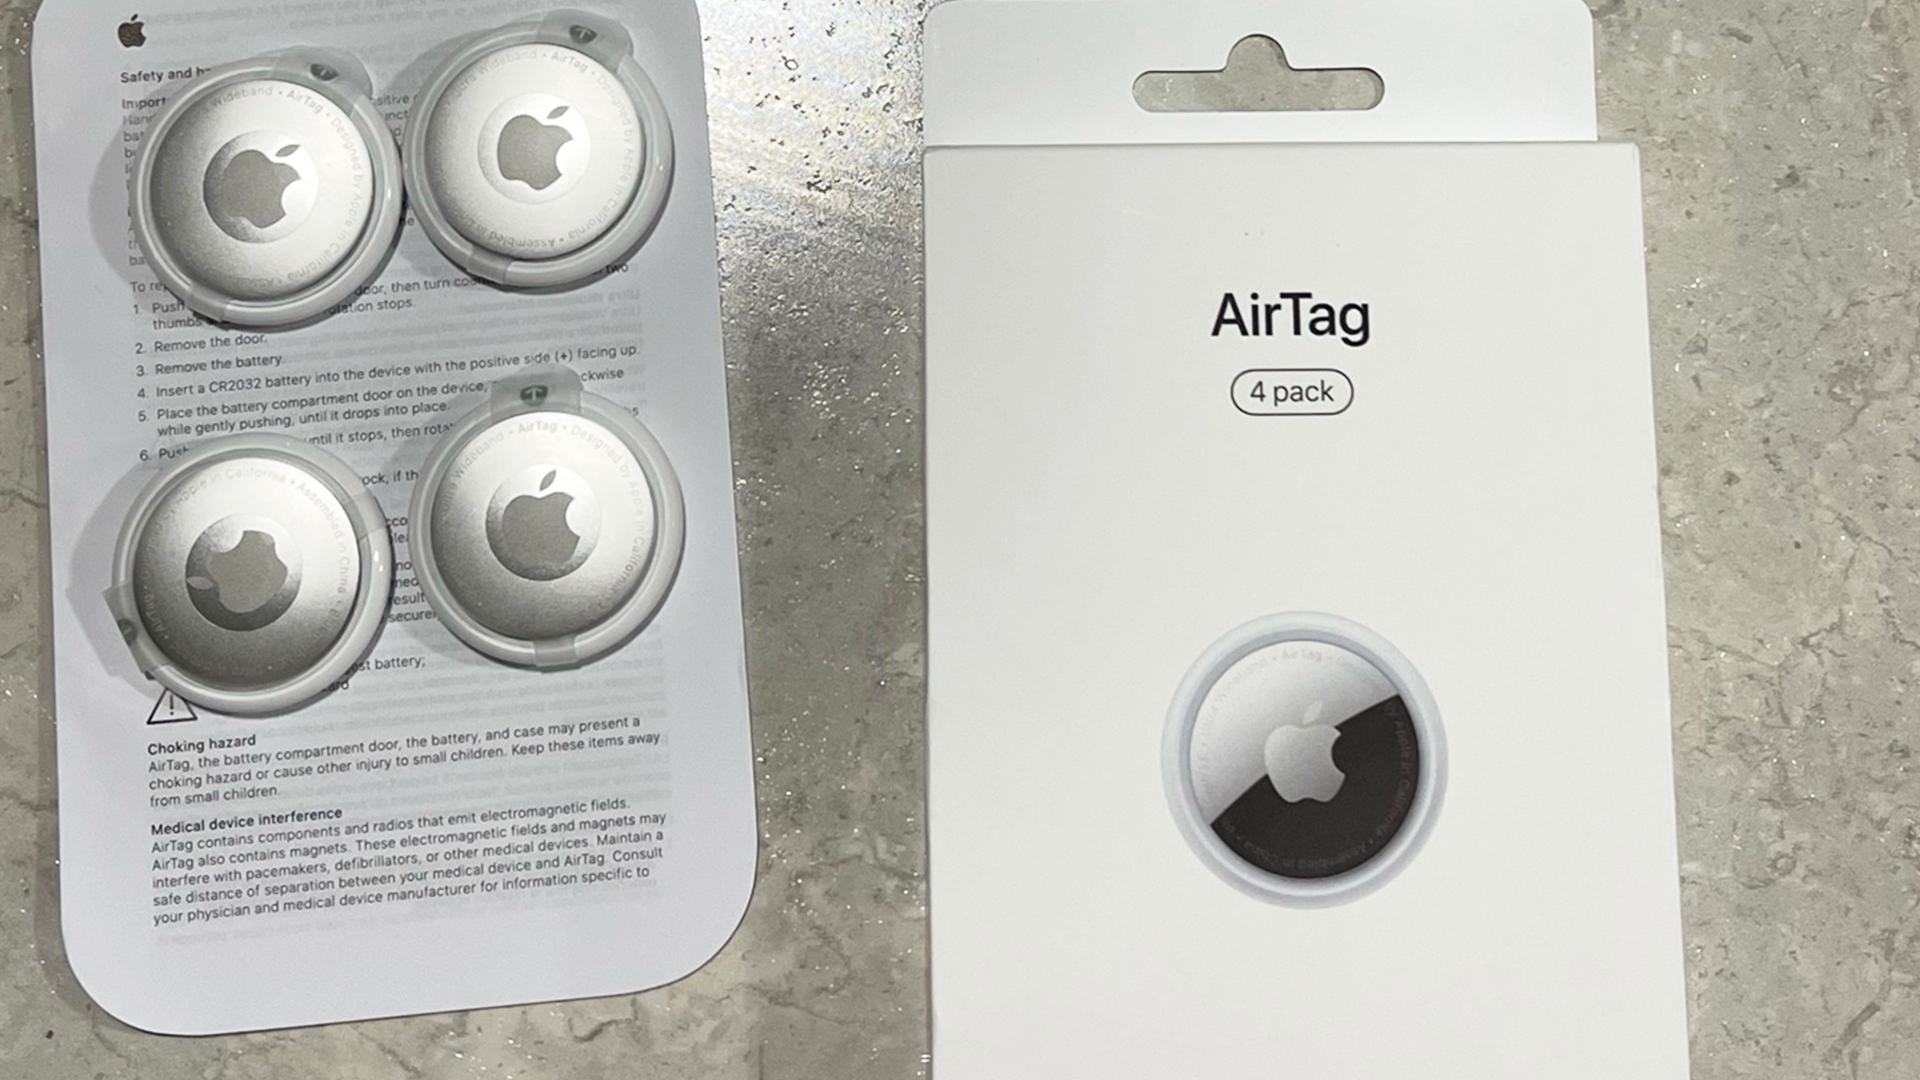 Apple's AirTag 4-pack is on sale for $90